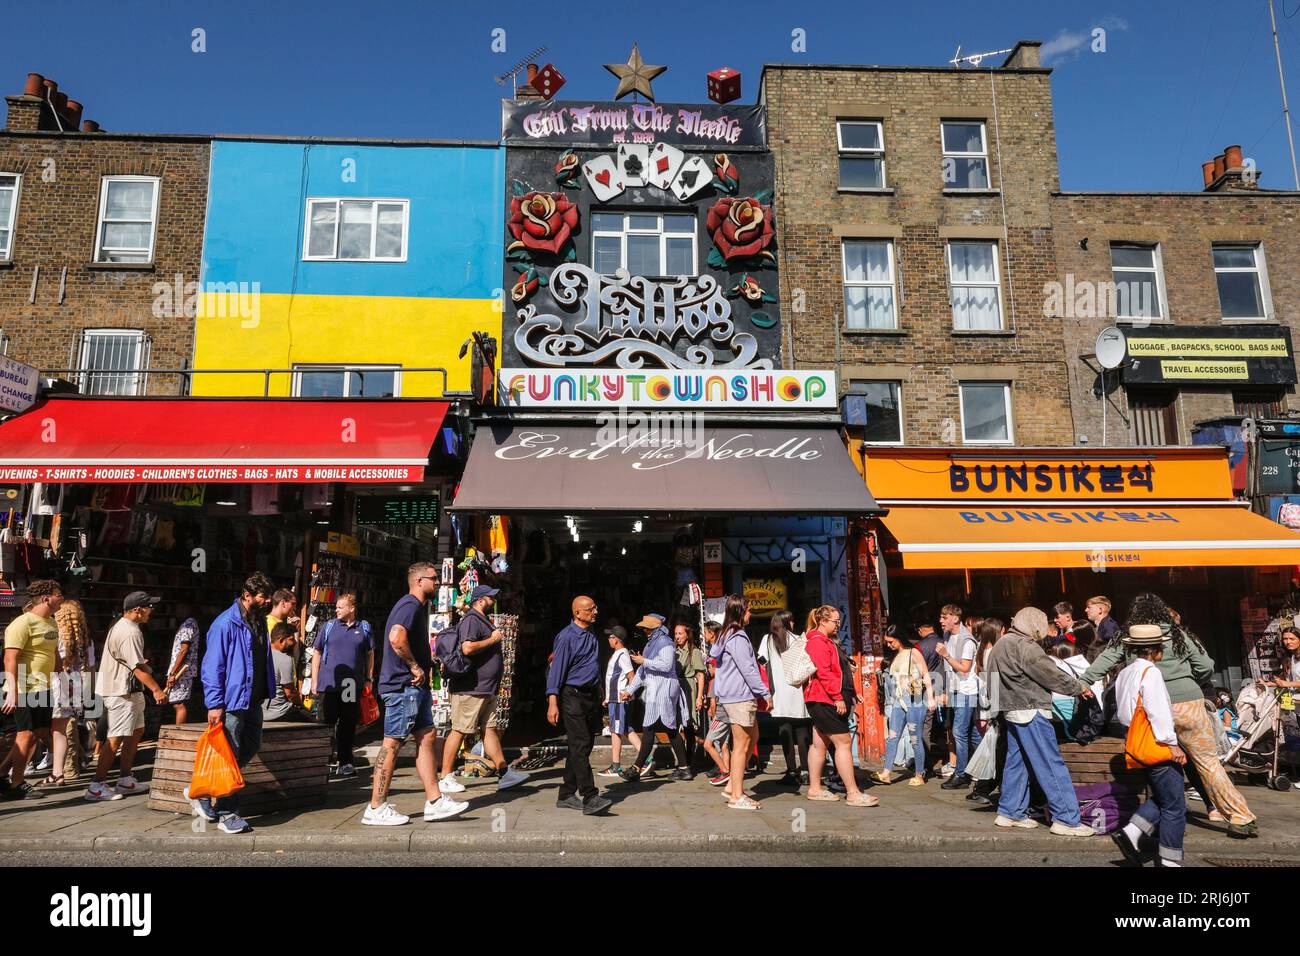 Tourists, visitors, people shopping in crowded Camden High Street, Camden Town, London, England, UK Stock Photo